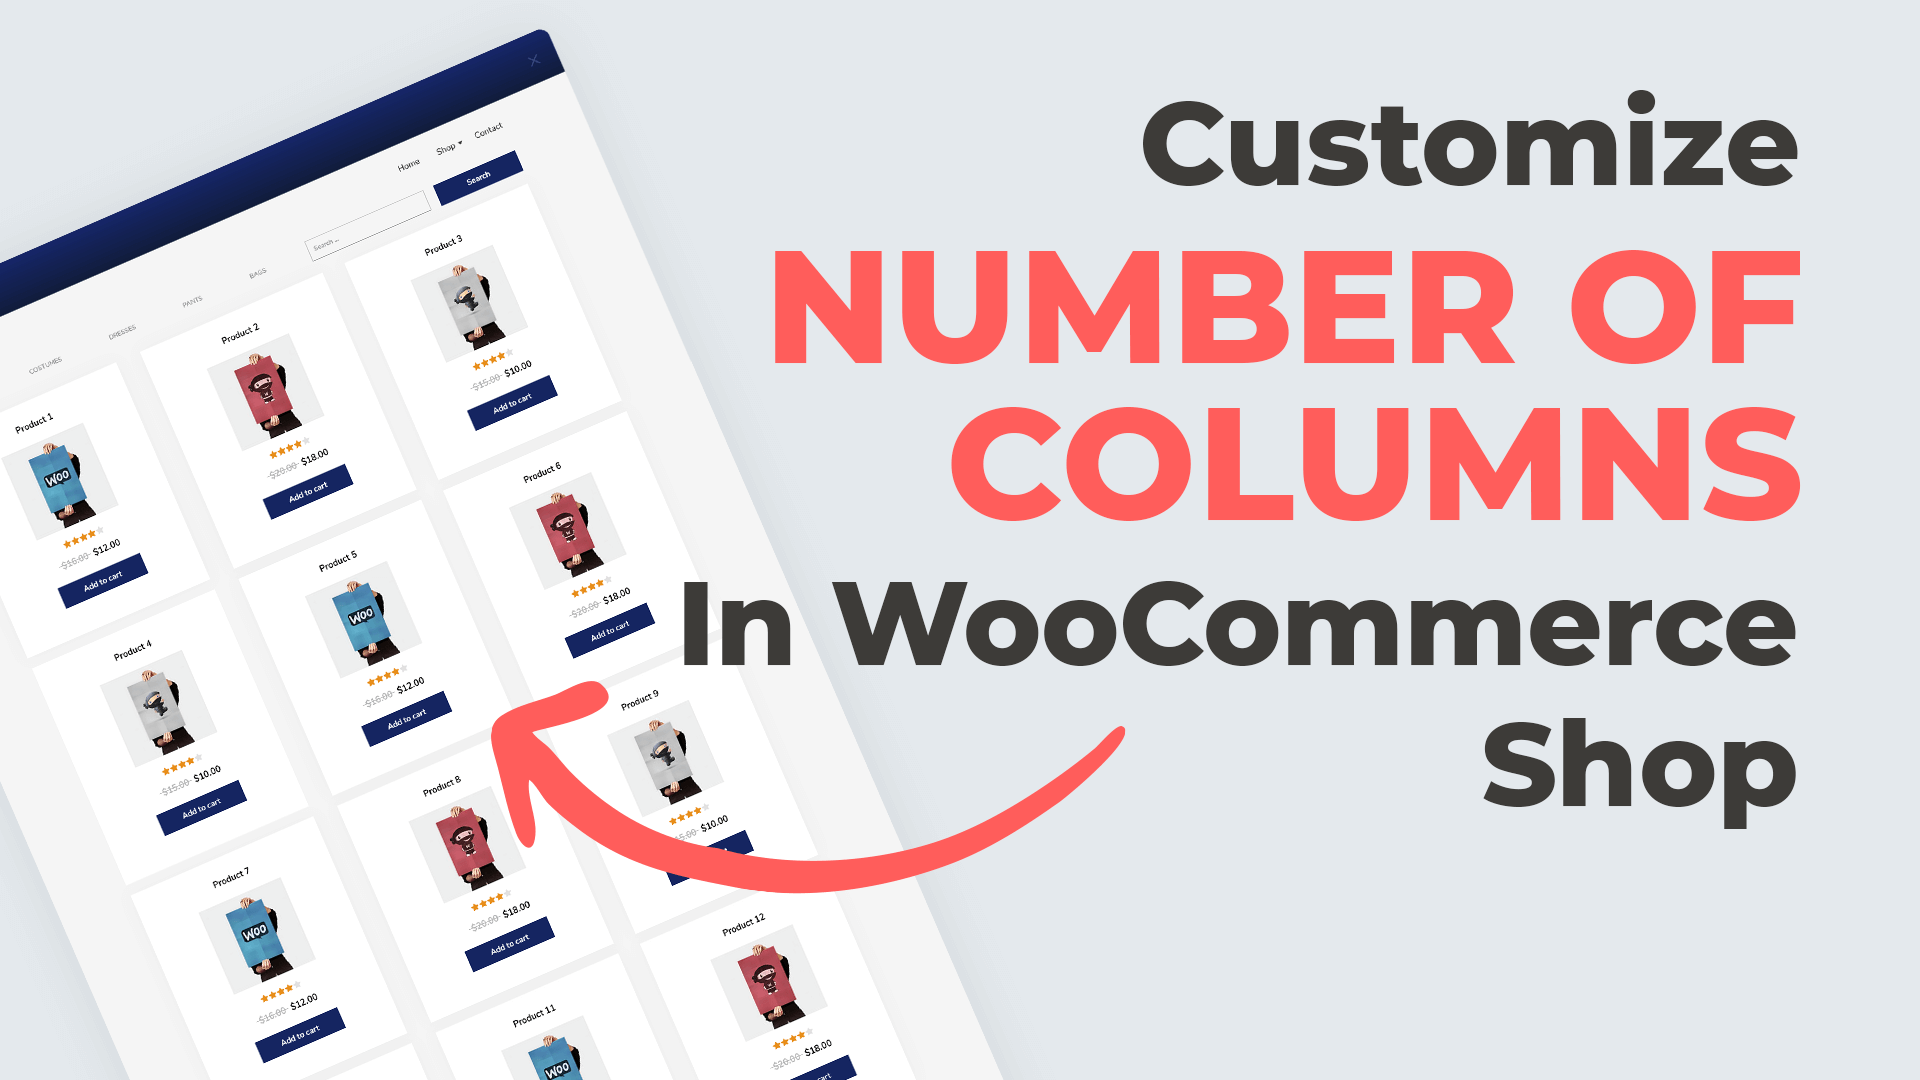 Customize Number Of Columns In WooCommerce Shop